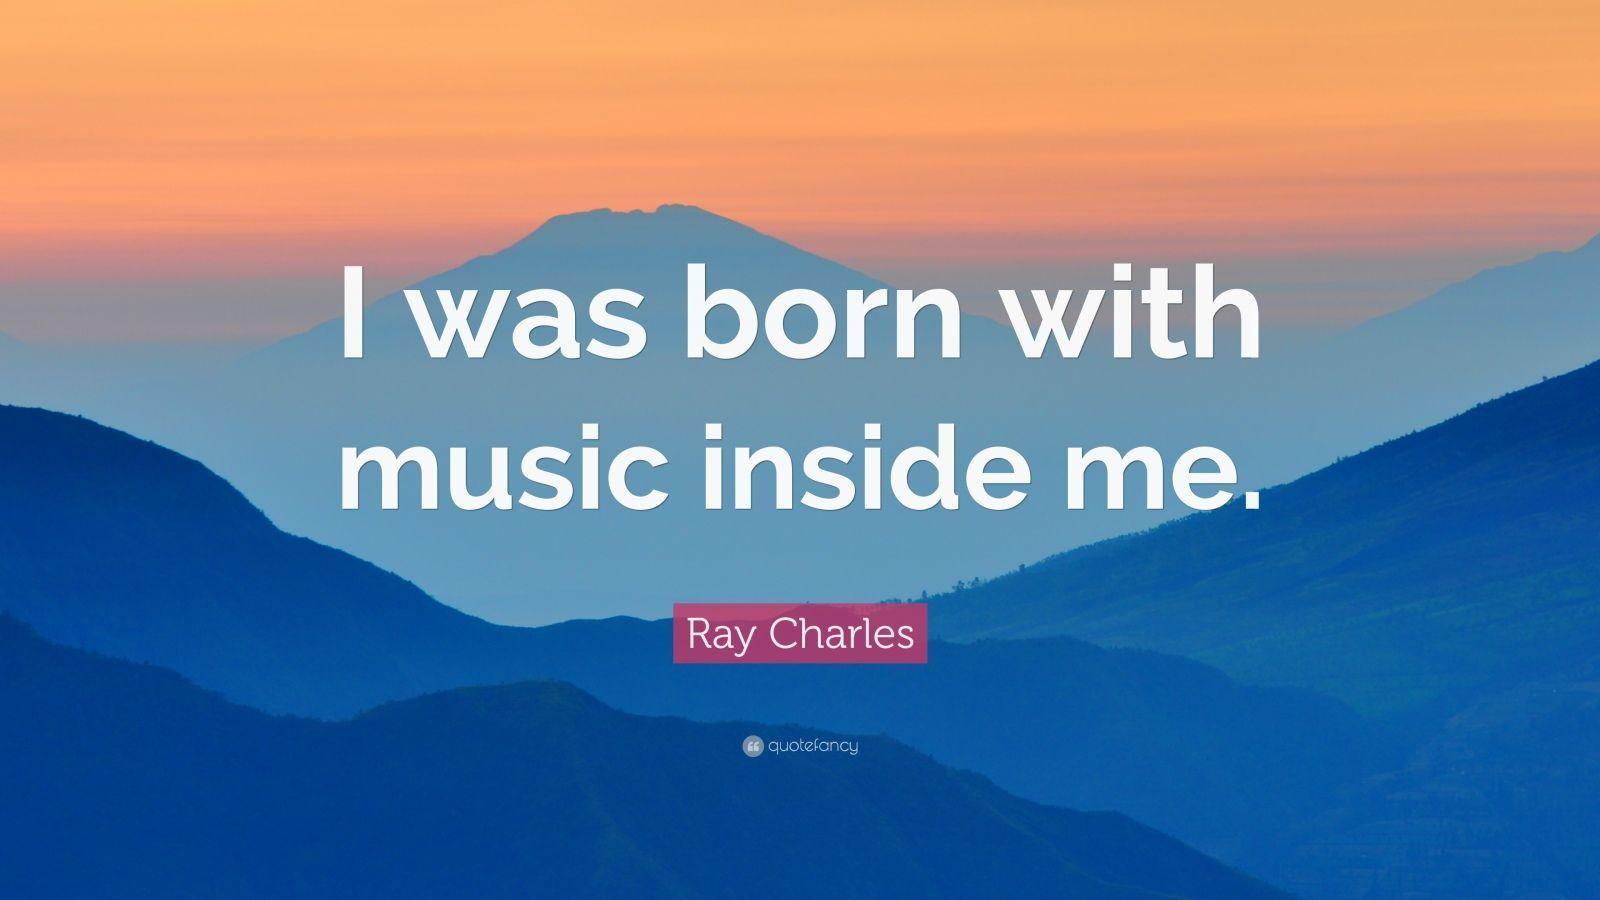 Ray Charles Quote: “I was born with music inside me.” 7 wallpaper